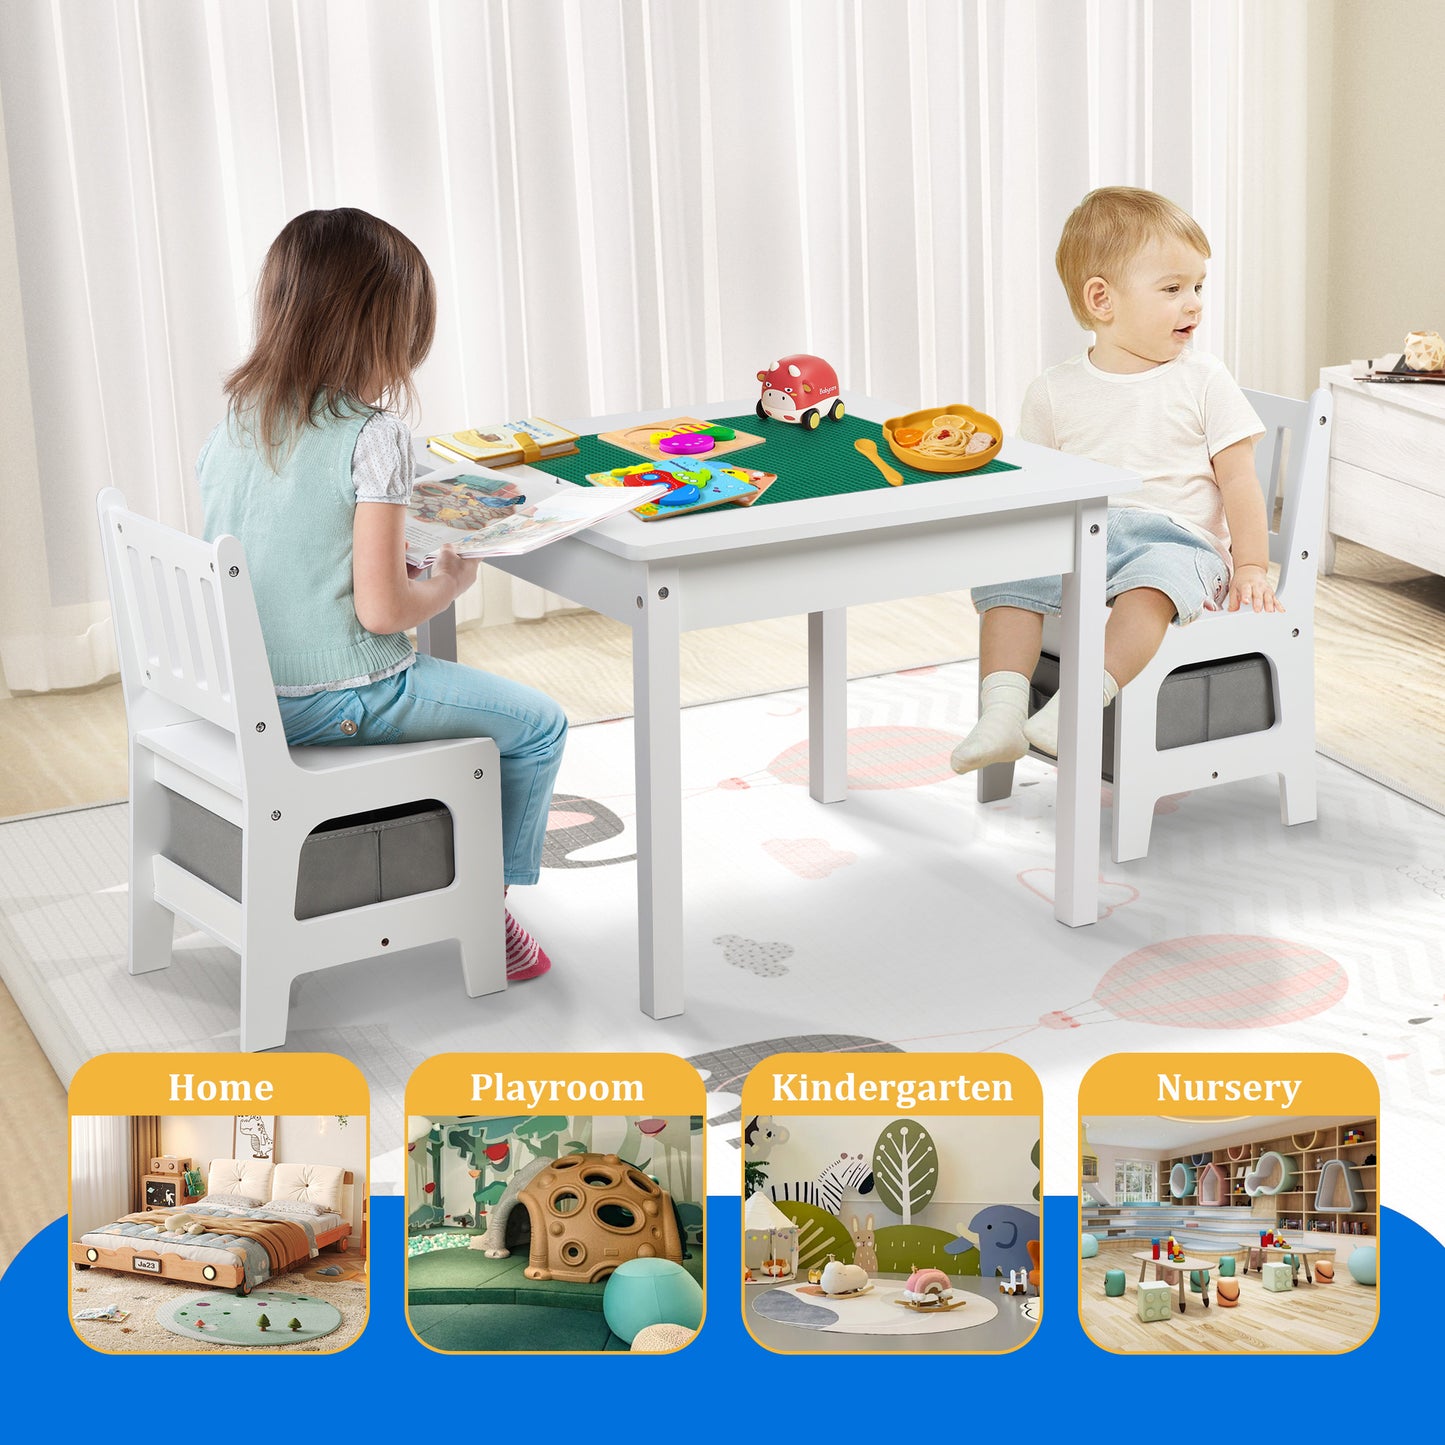 Kids Table and Chair Set, 2 in 1 Toddler Activity Table, Lego Block Play Table, White